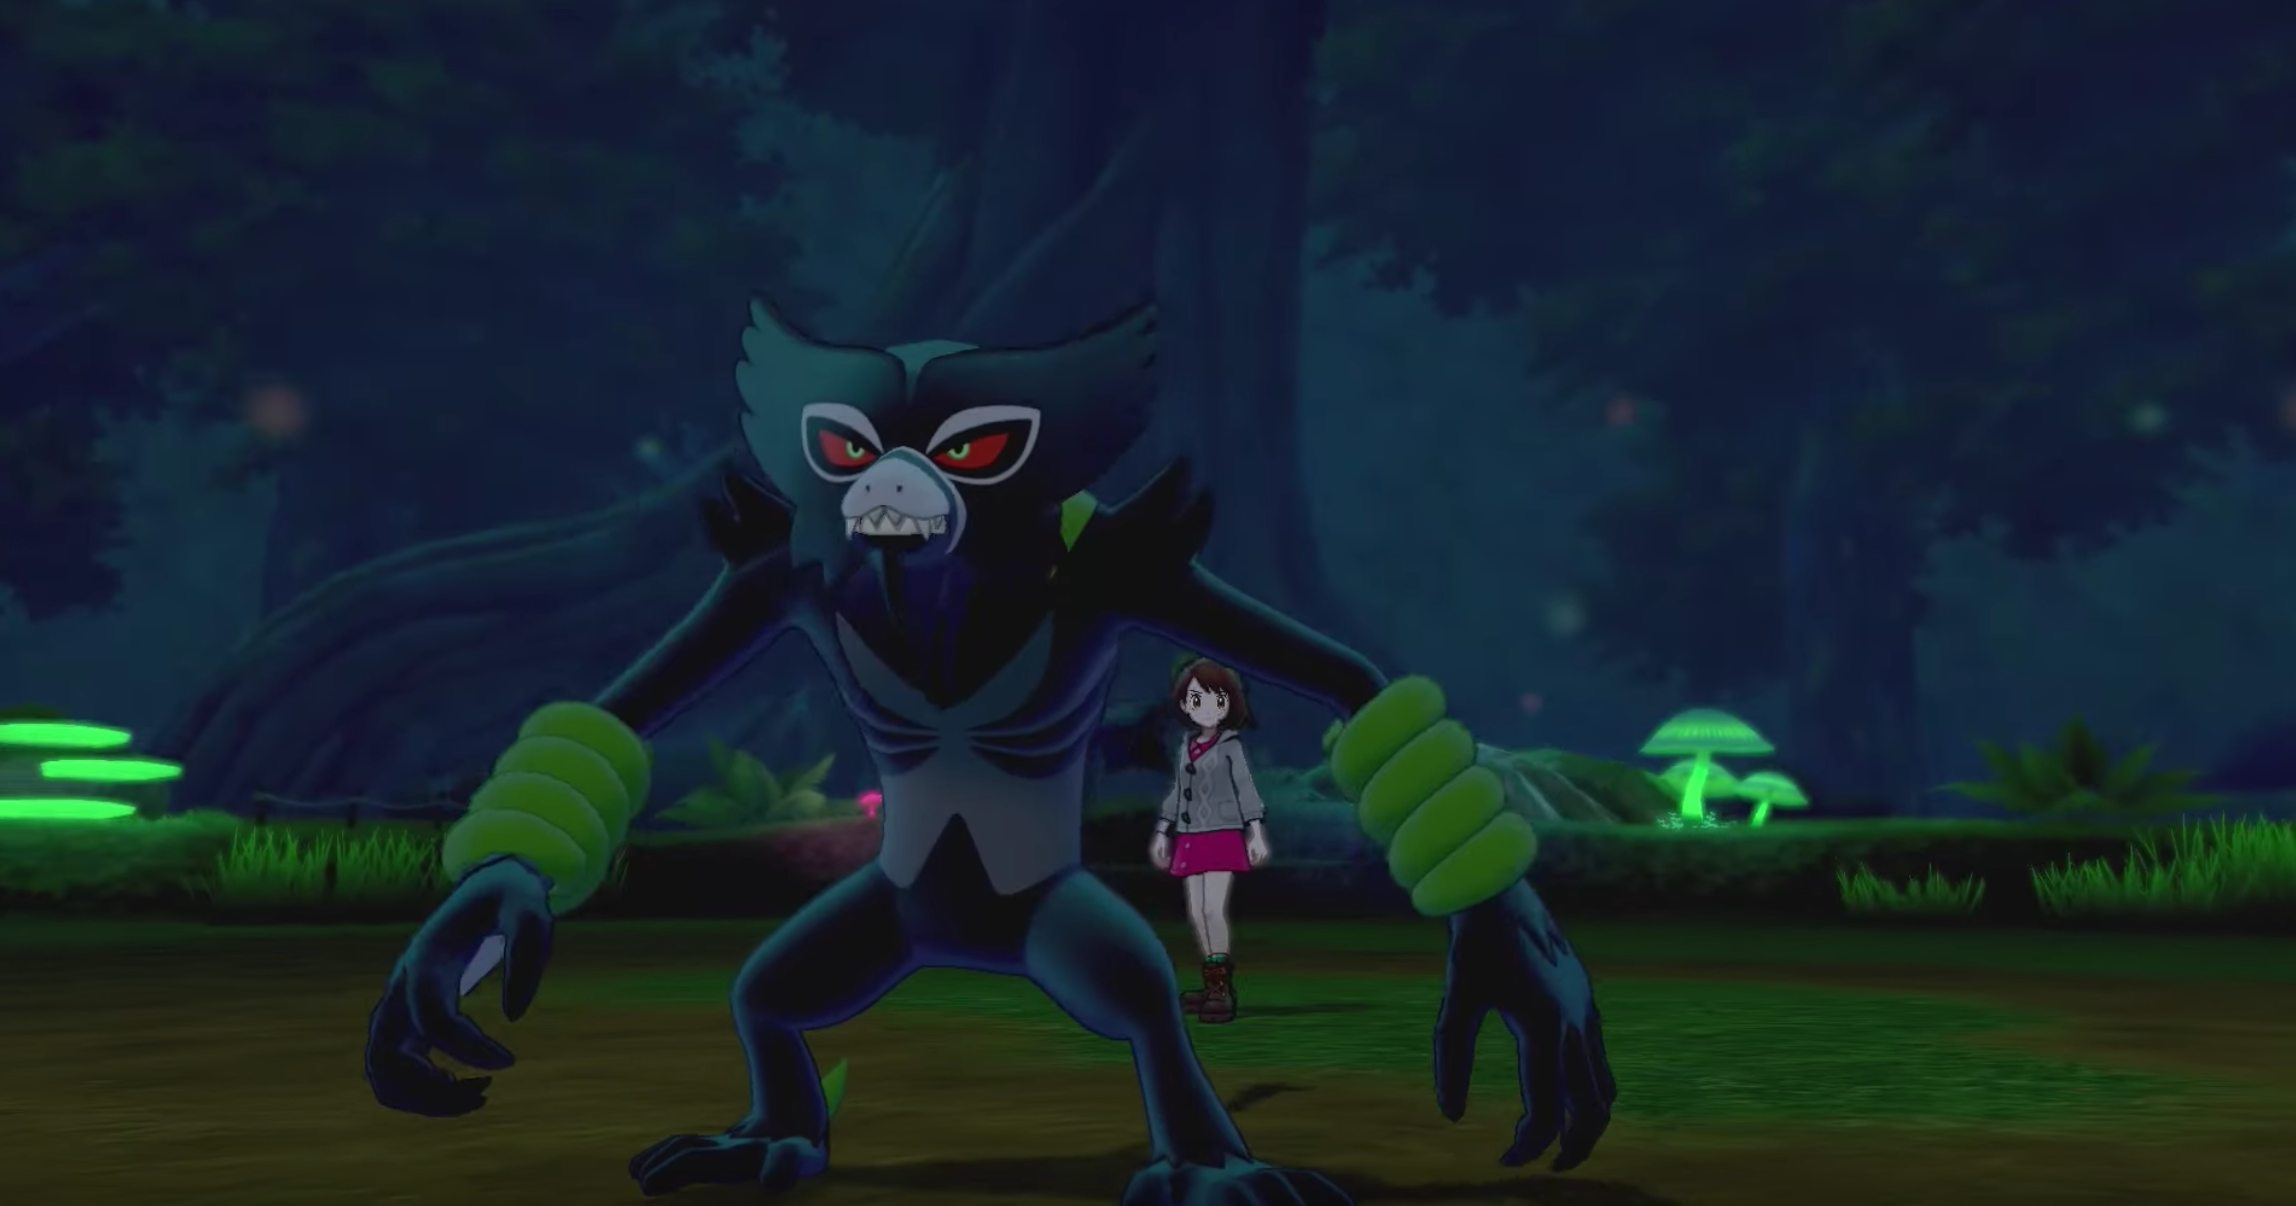 The Monkey-Like Zarude Is The New Mythical Pokémon In Sword And Shield